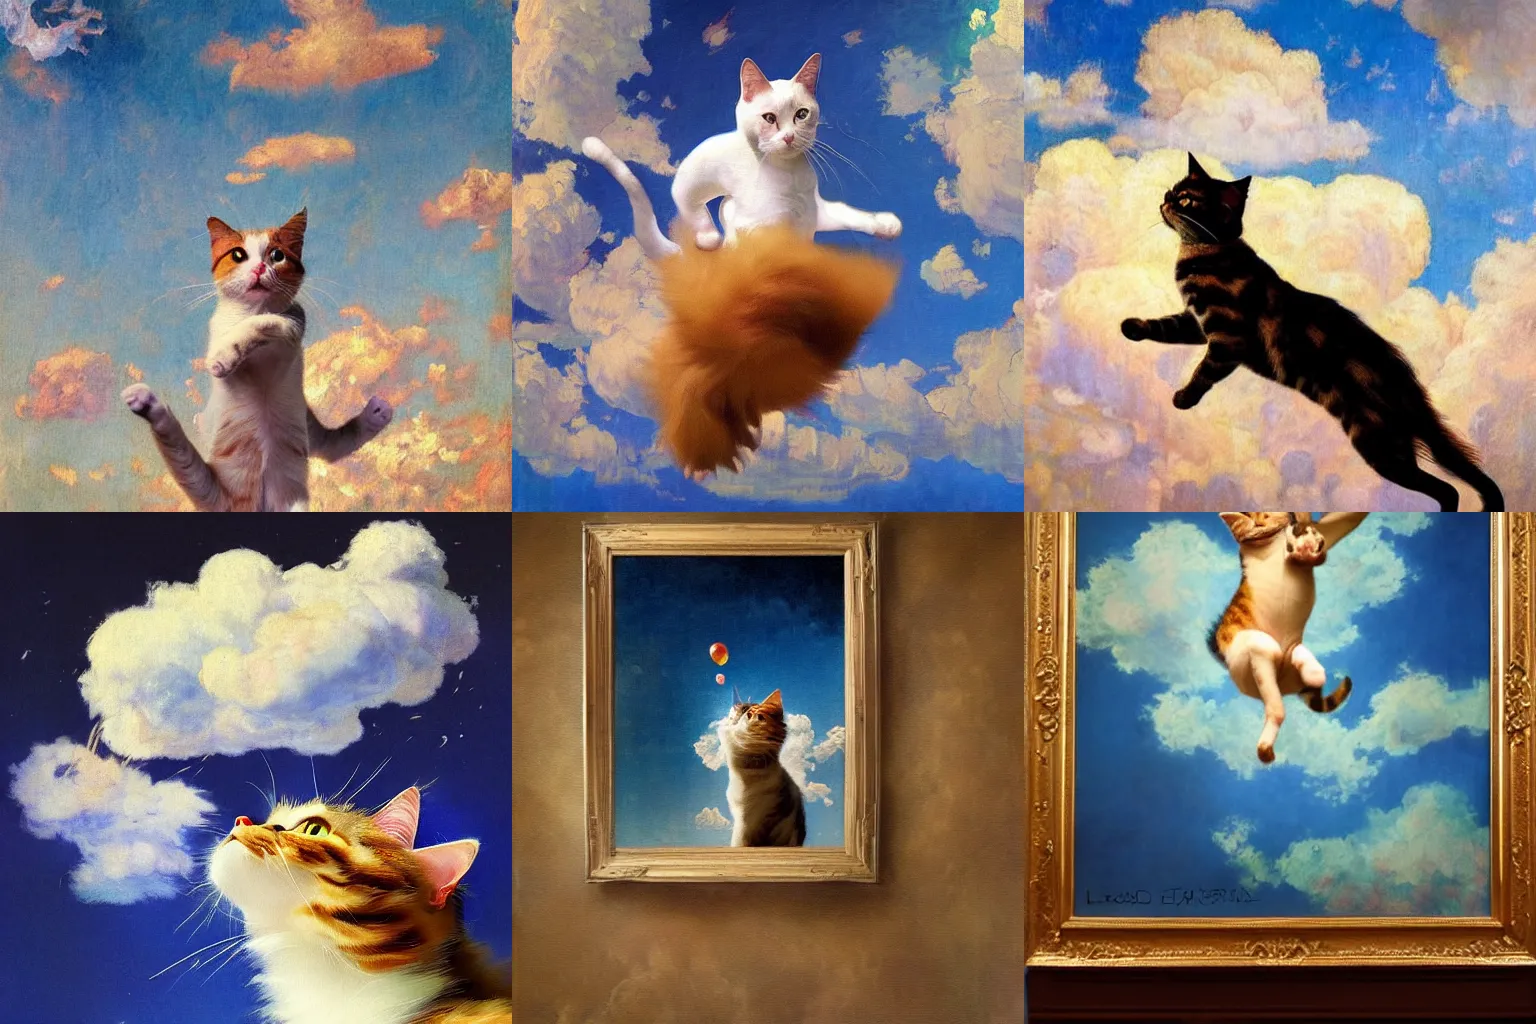 Image similar to "An impressionist painting of a jumping cat under the sky